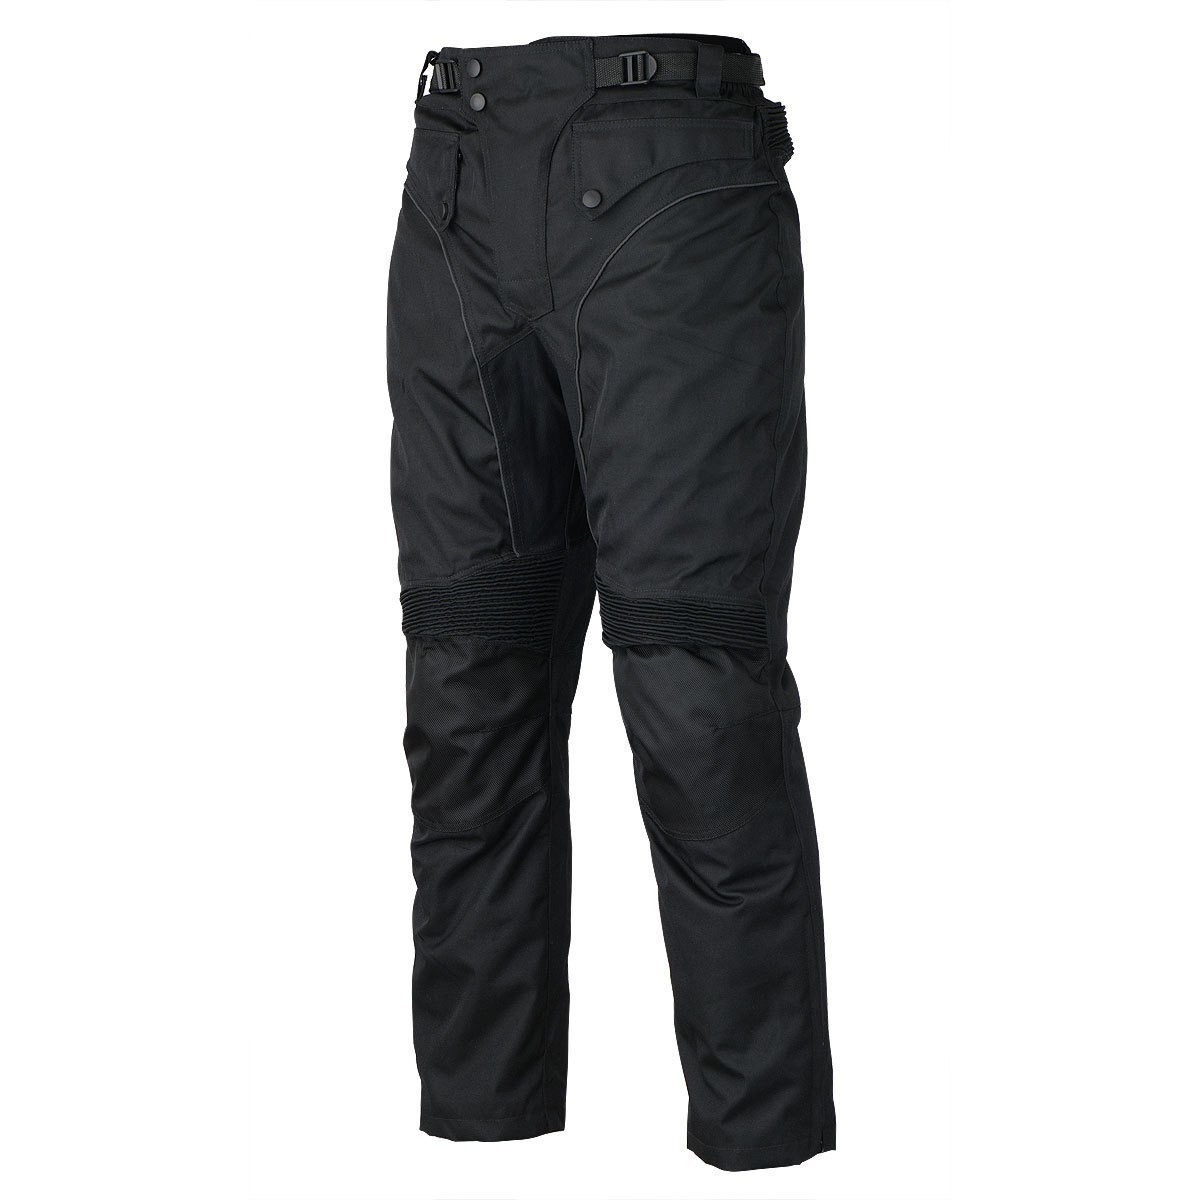 GR Motorcycle Pants Waterproof Jeans with Armor Protector Pads